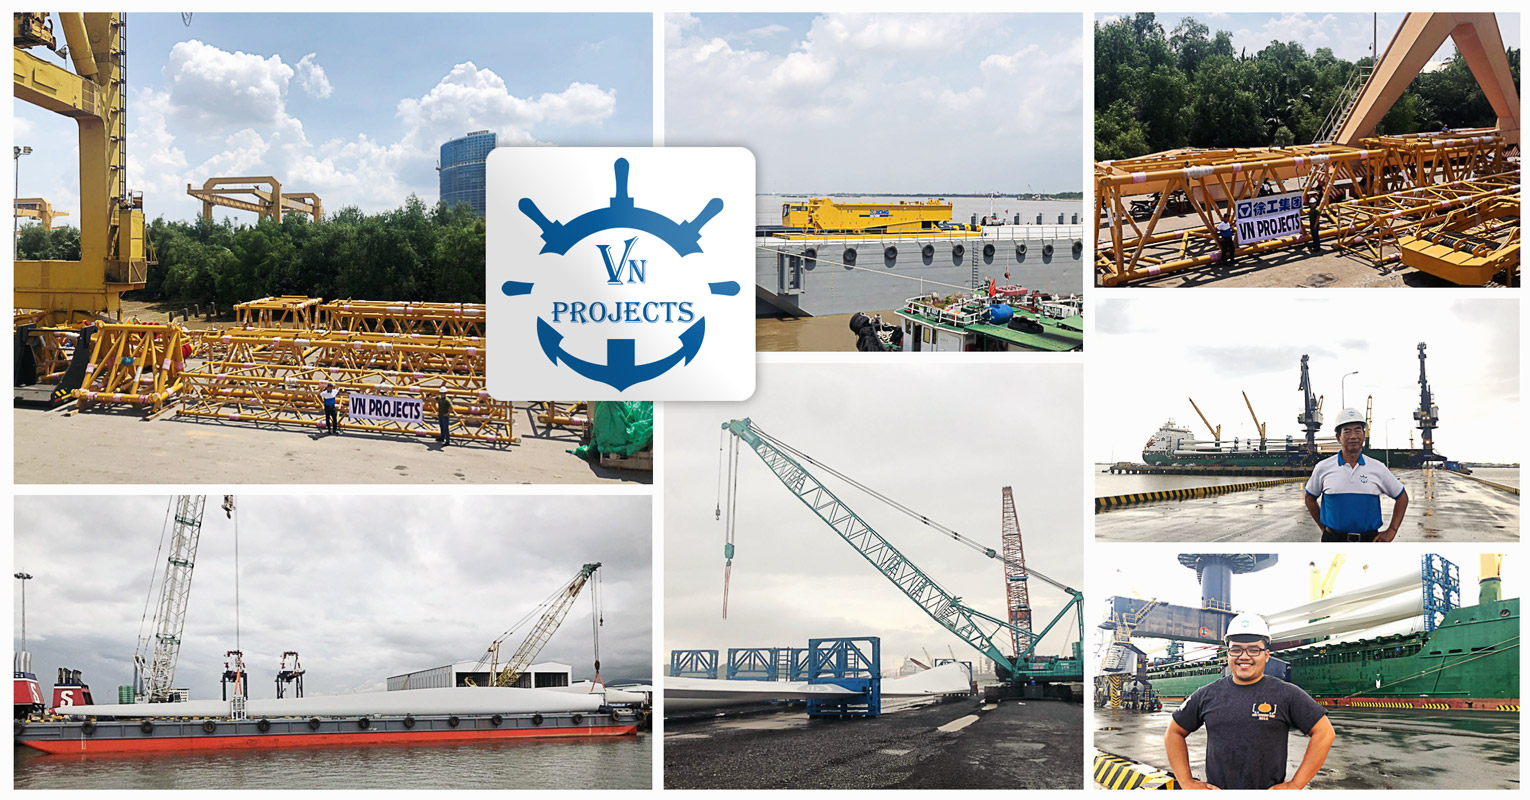 VN Projects Performed Barging, Port Handling, Customer Clearance and Rigging for Near Shore Wind Power Projects